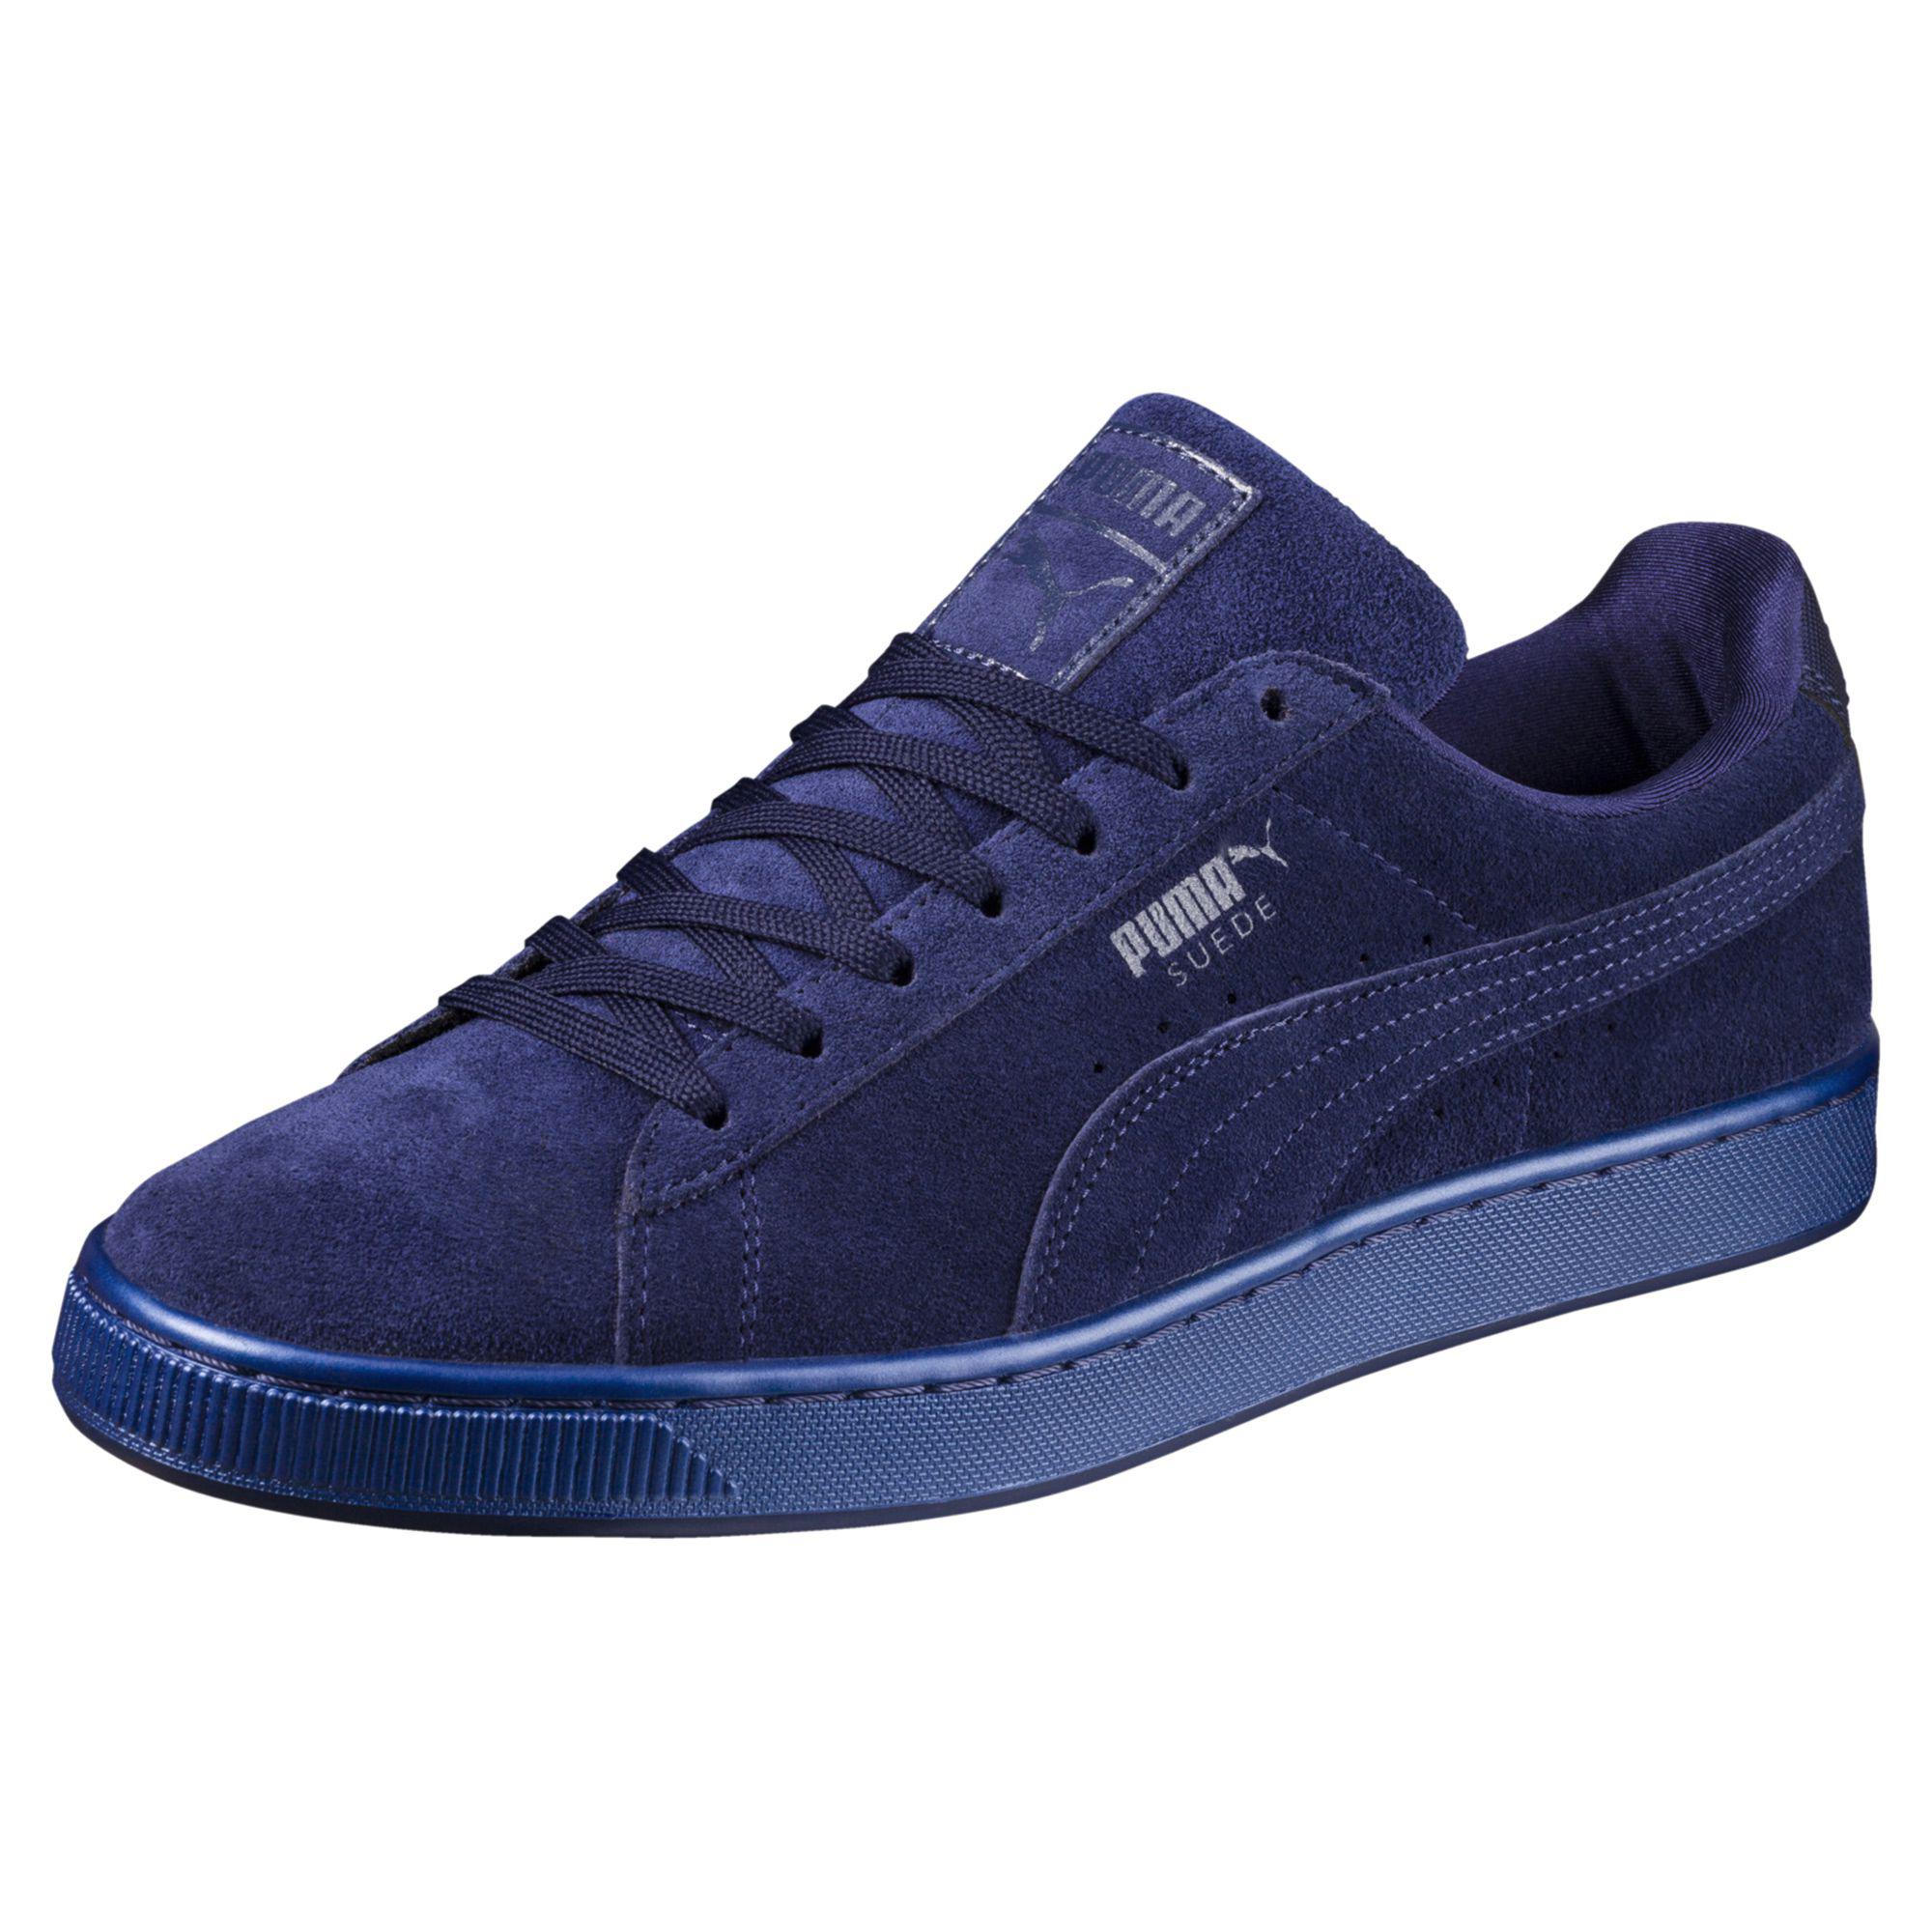 PUMA Suede Classic Anodized Sneakers in Blue for Men - Lyst